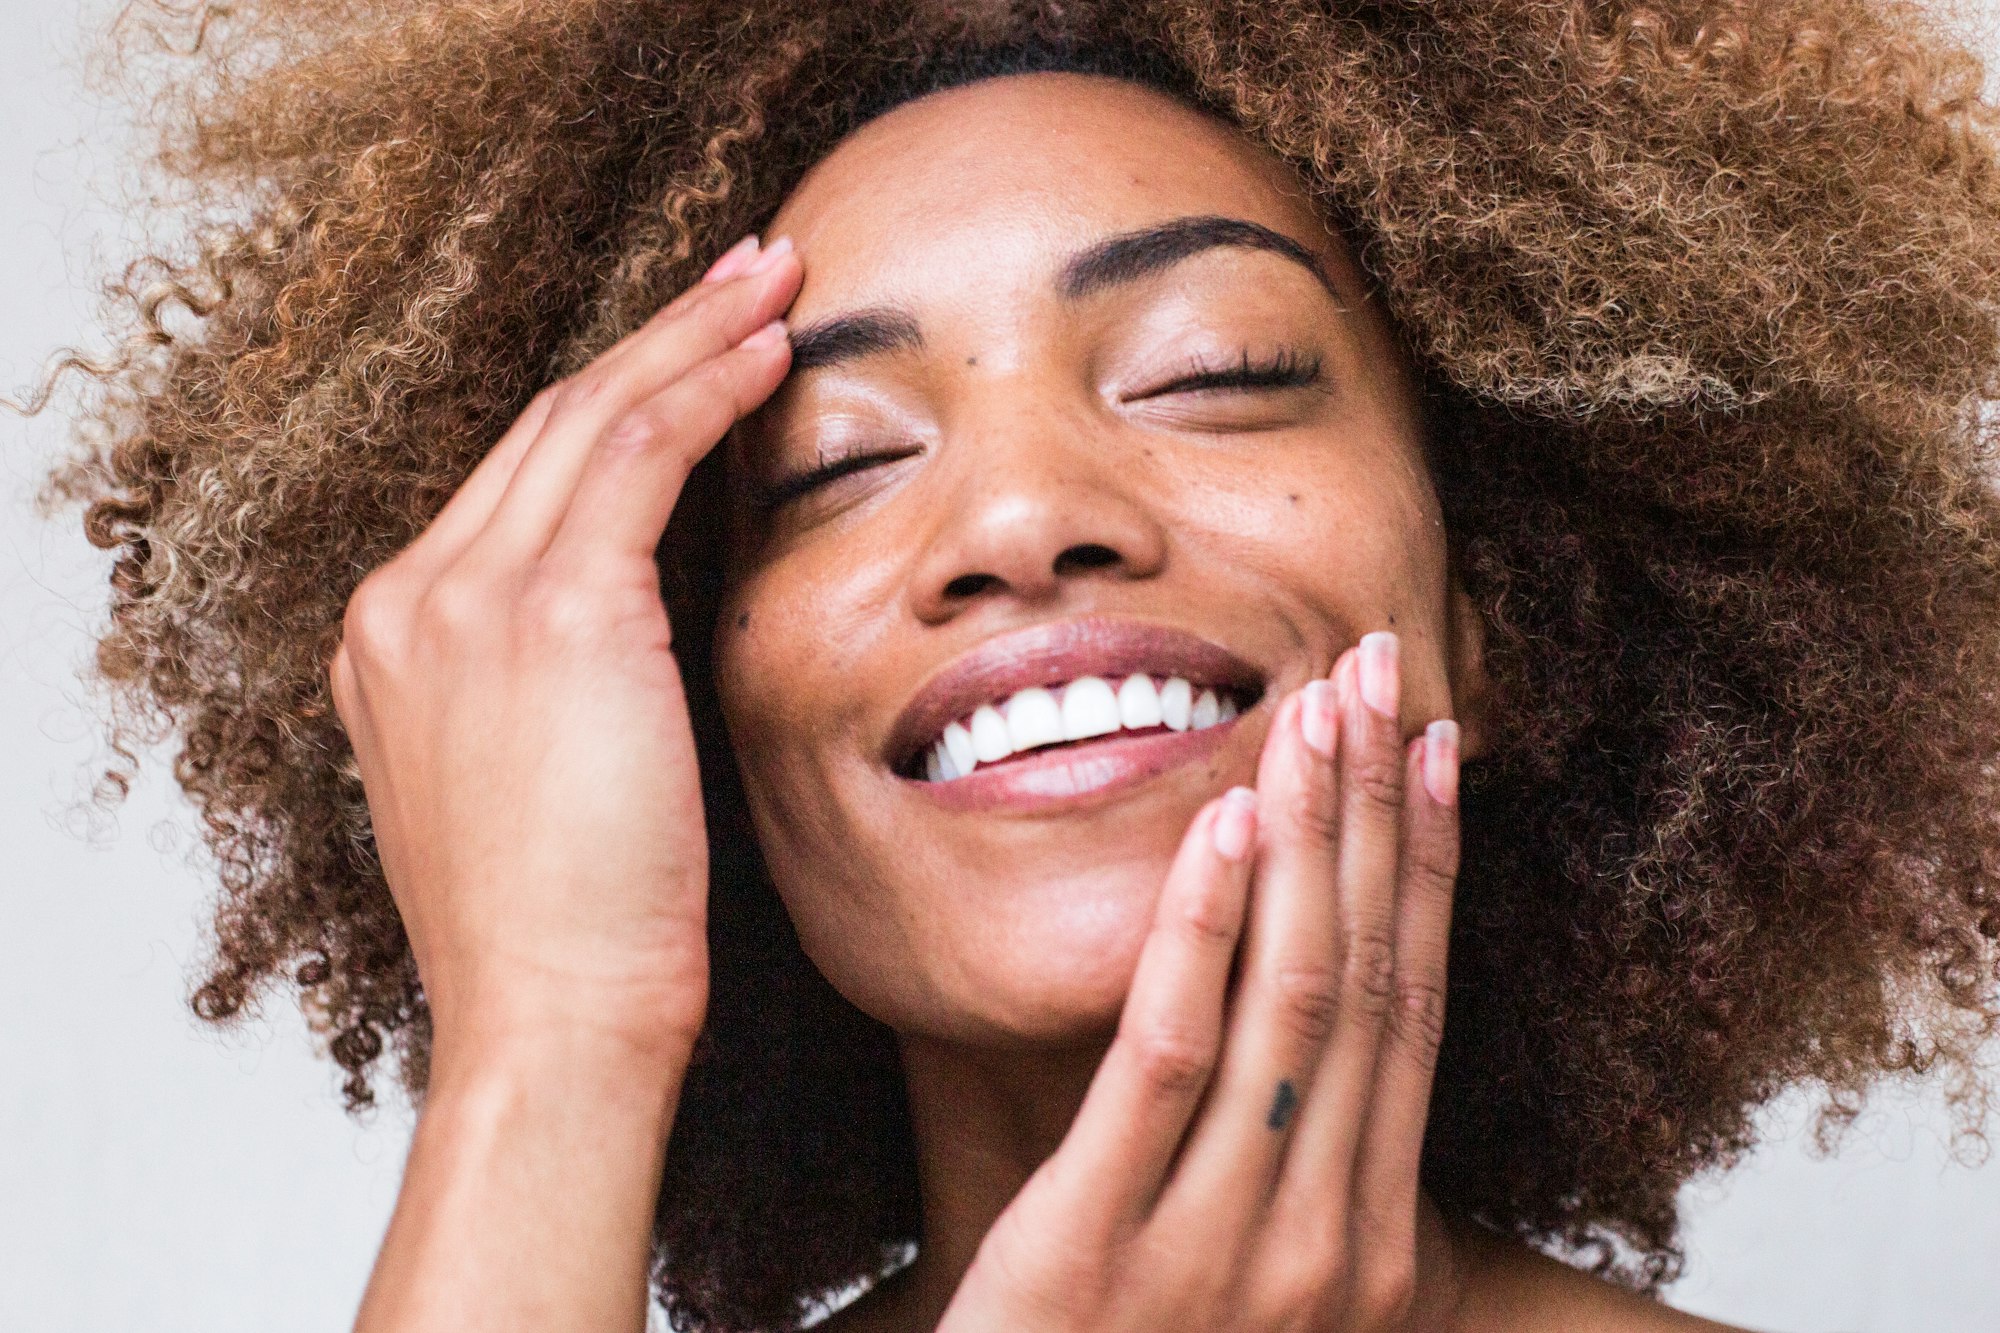 HOW TO CURE DRY SKIN ON YOUR FACE OVERNIGHT